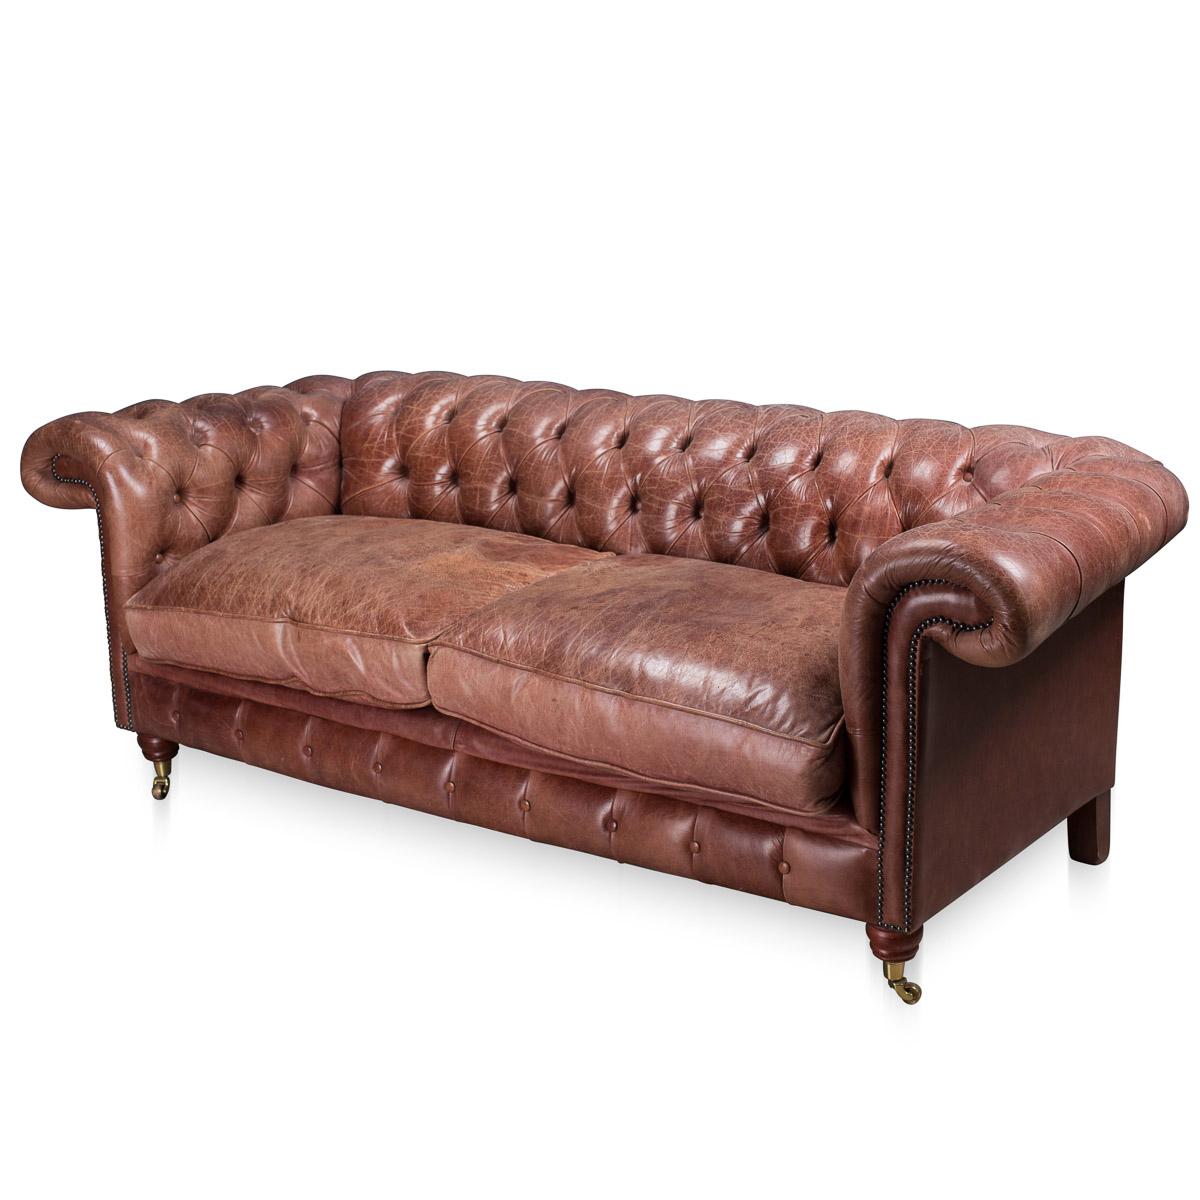 English Superb 20th Century Chesterfield Feather Filled Leather Sofa, circa 1990